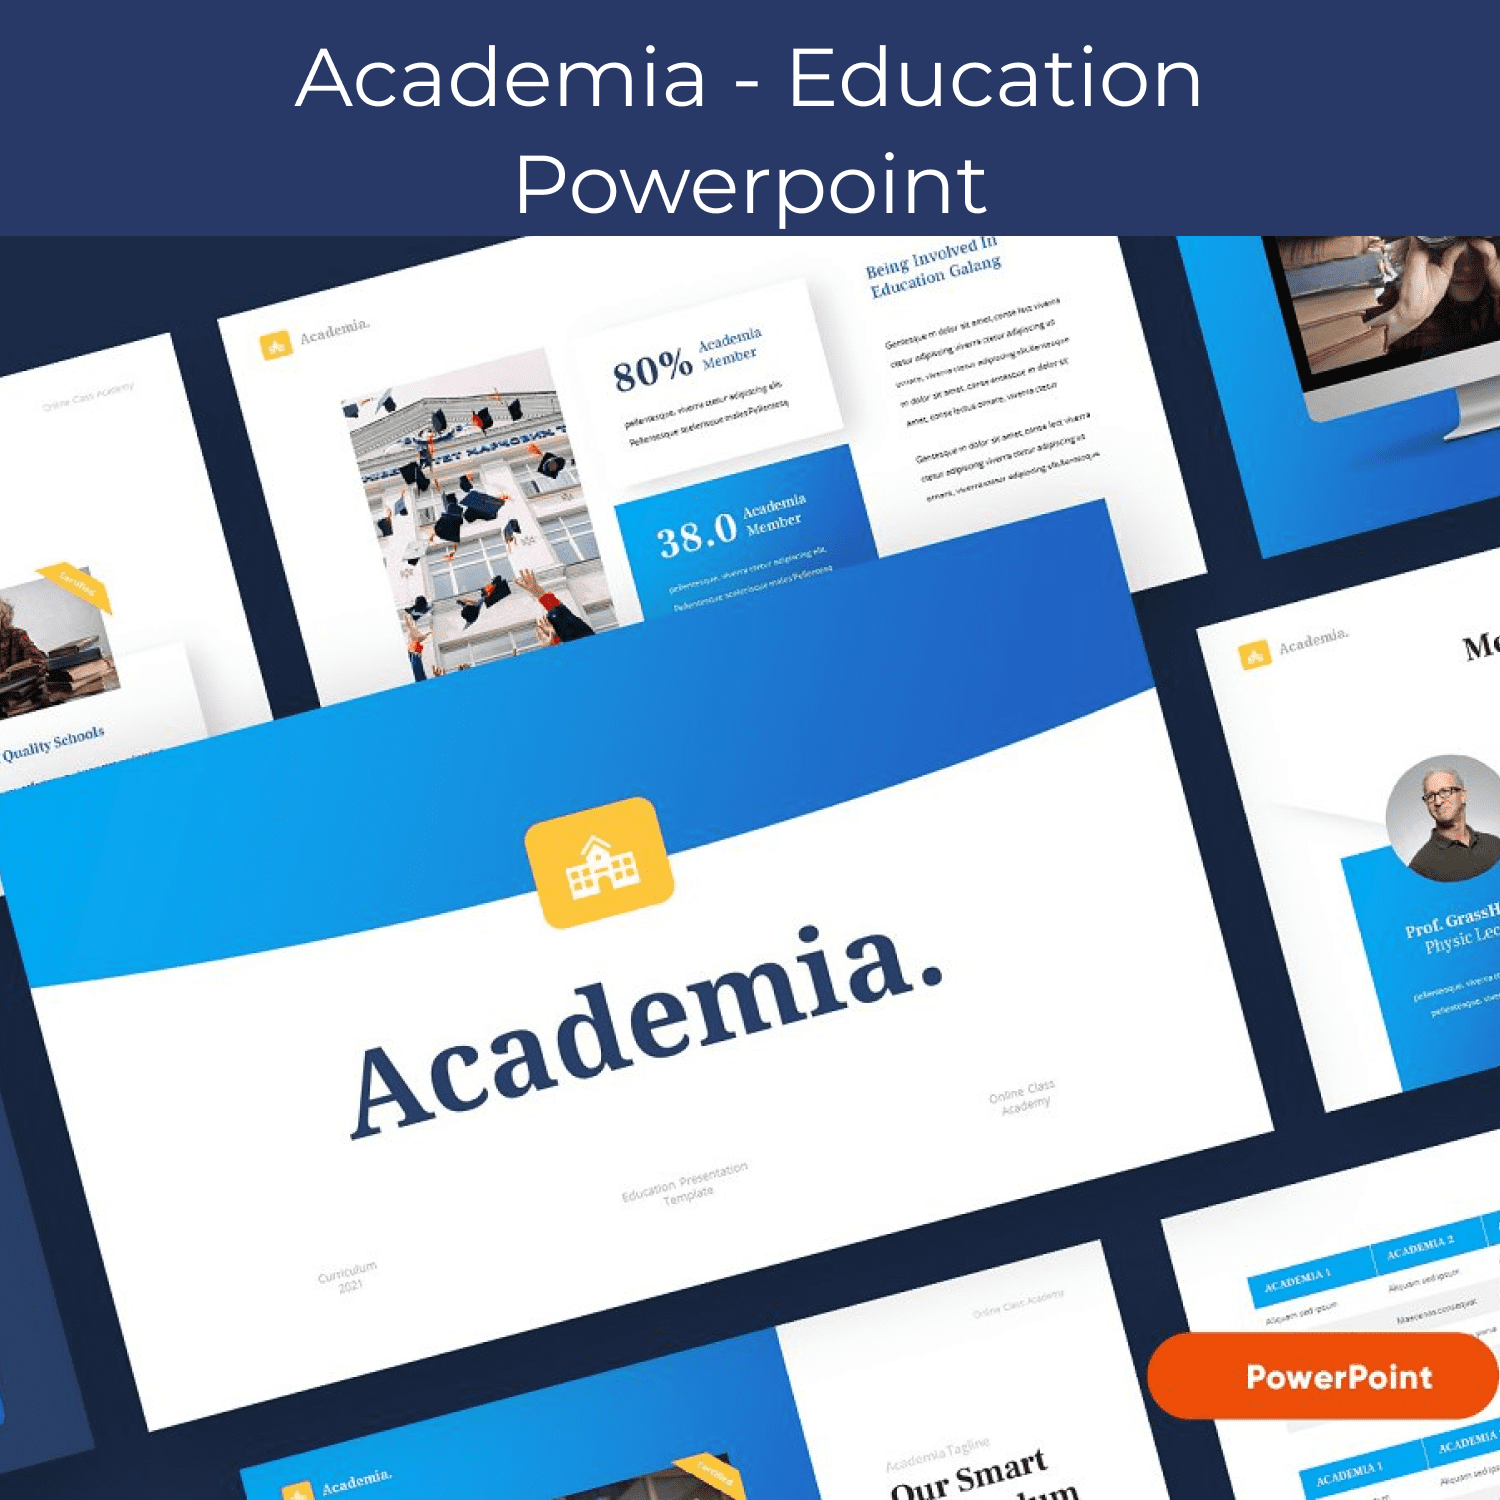 Academia - Education Powerpoint cover.